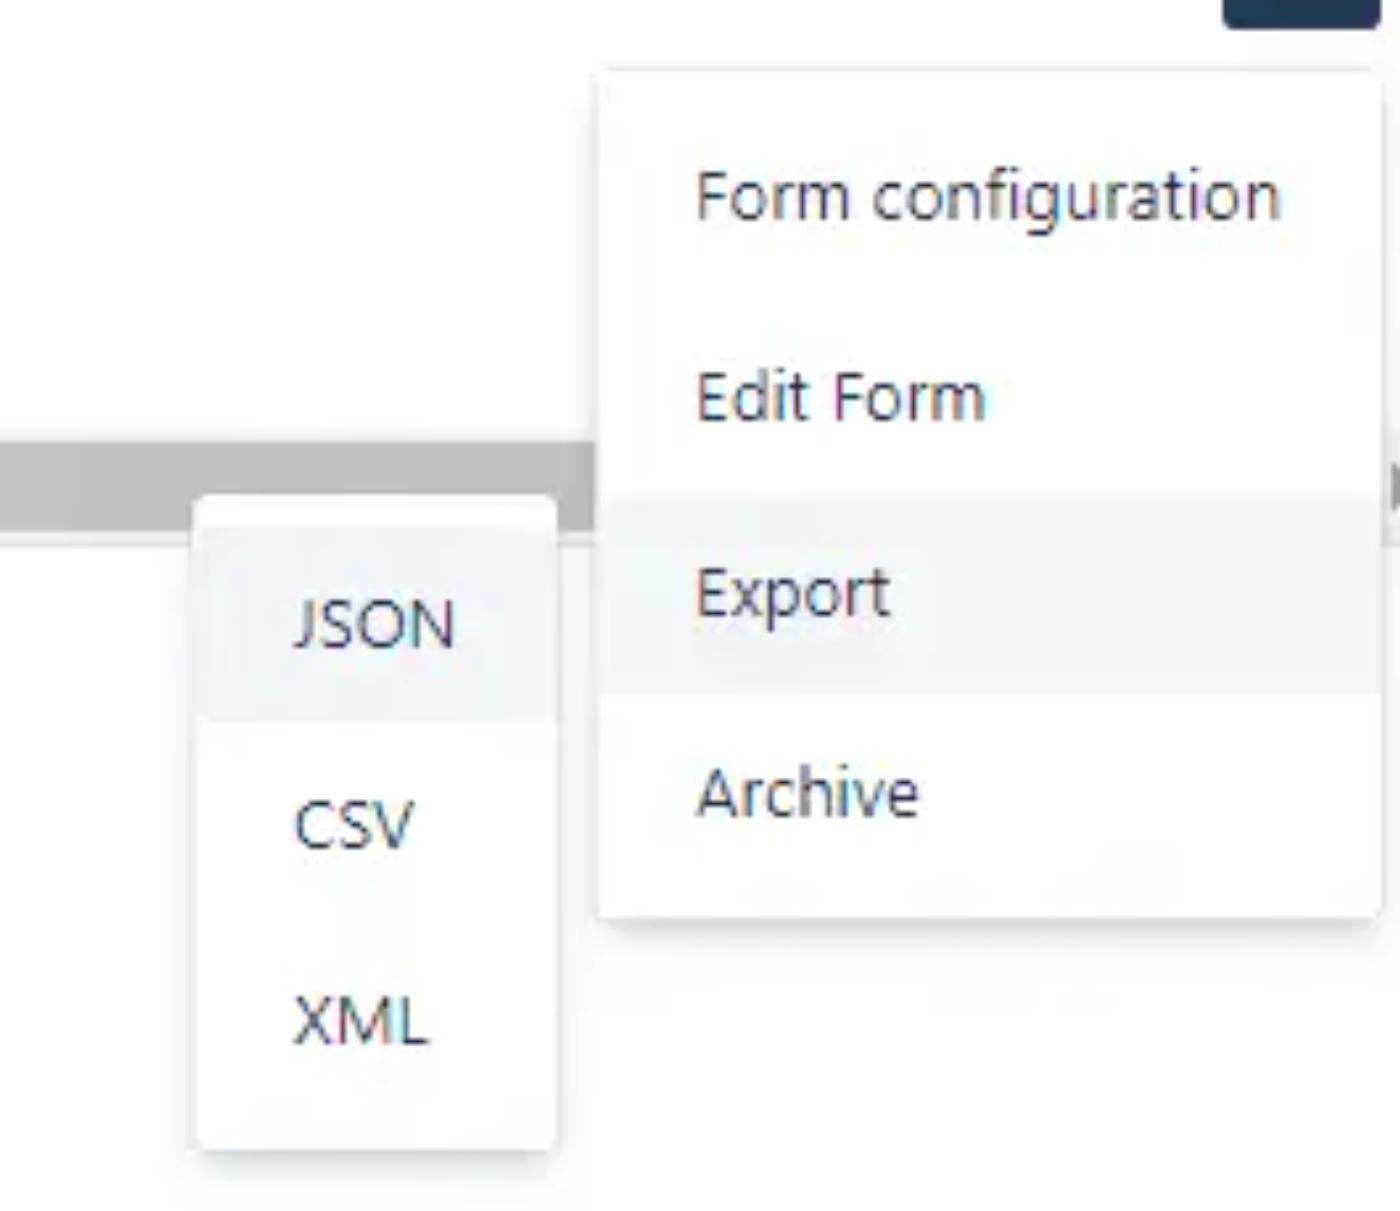 A dropdown list showing the available data formats for exporting form data.